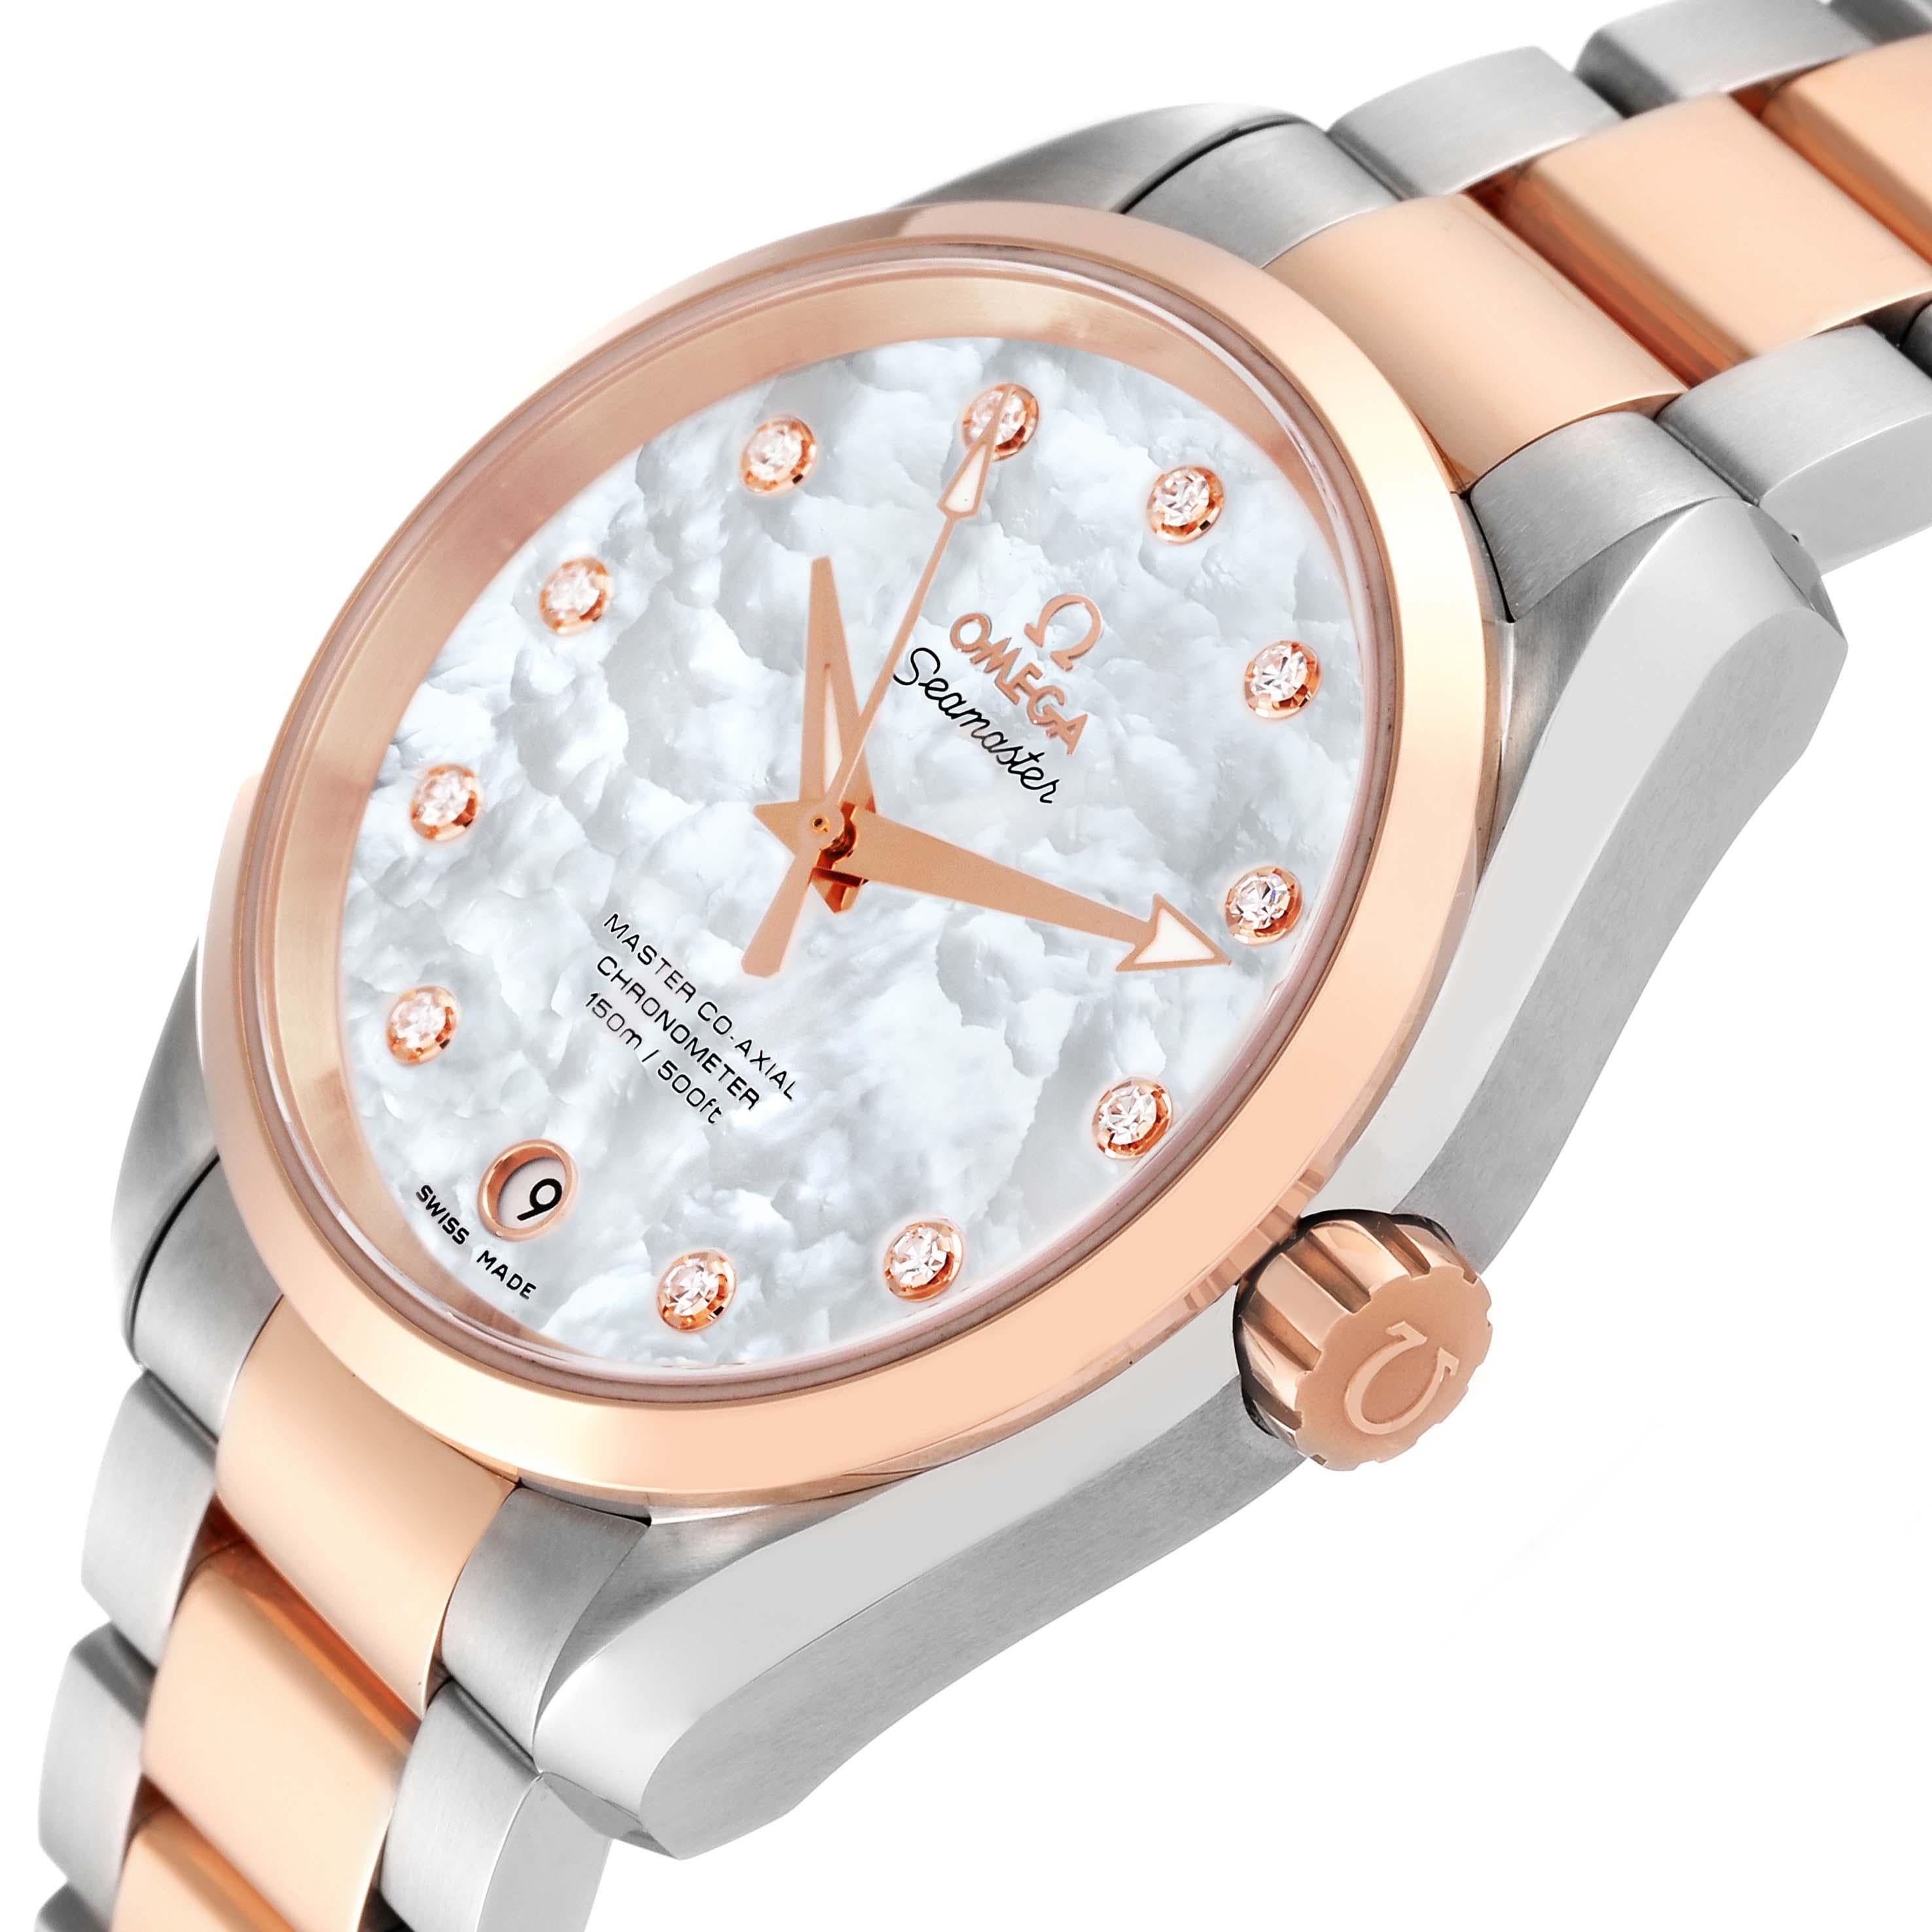 Omega Aqua Terra Rose Gold Mother of Pearl Diamond Ladies Watch For Sale 1